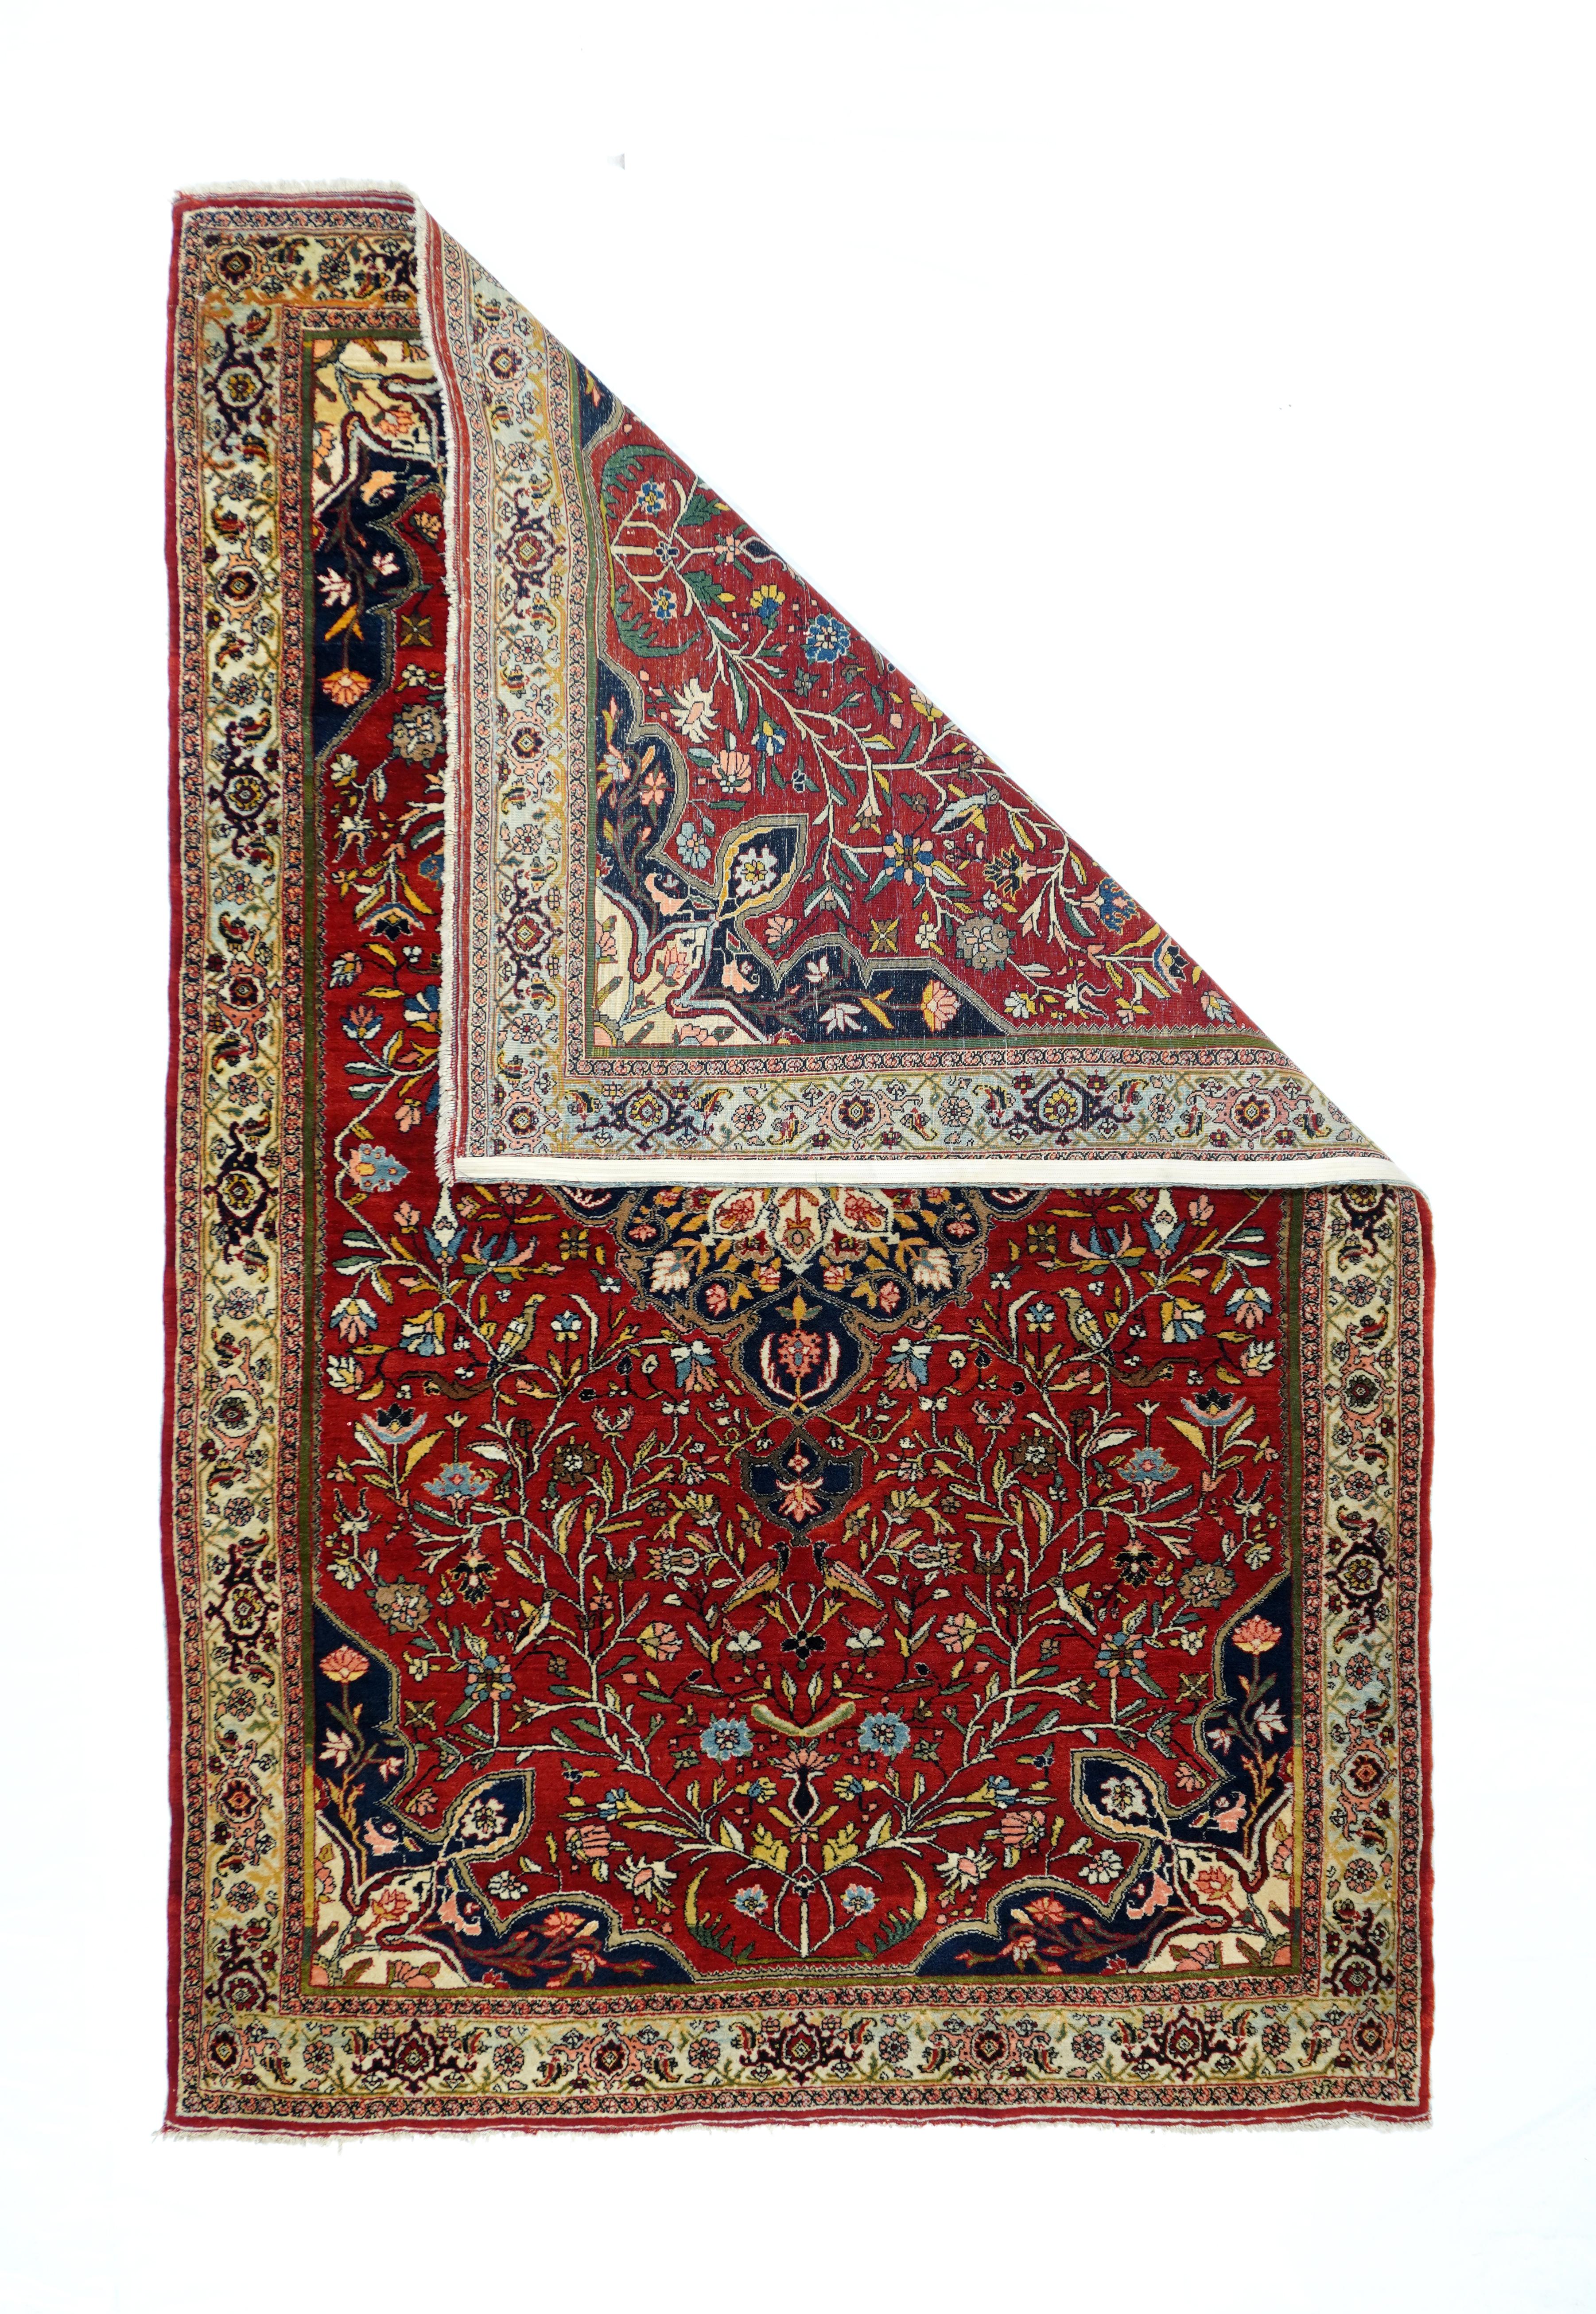 This robust urban Kurdish scatter displays a saturated red field centred by a layered navy and ecru octilobe medallion with radiating internal flowers. Stems vigourously grow from 